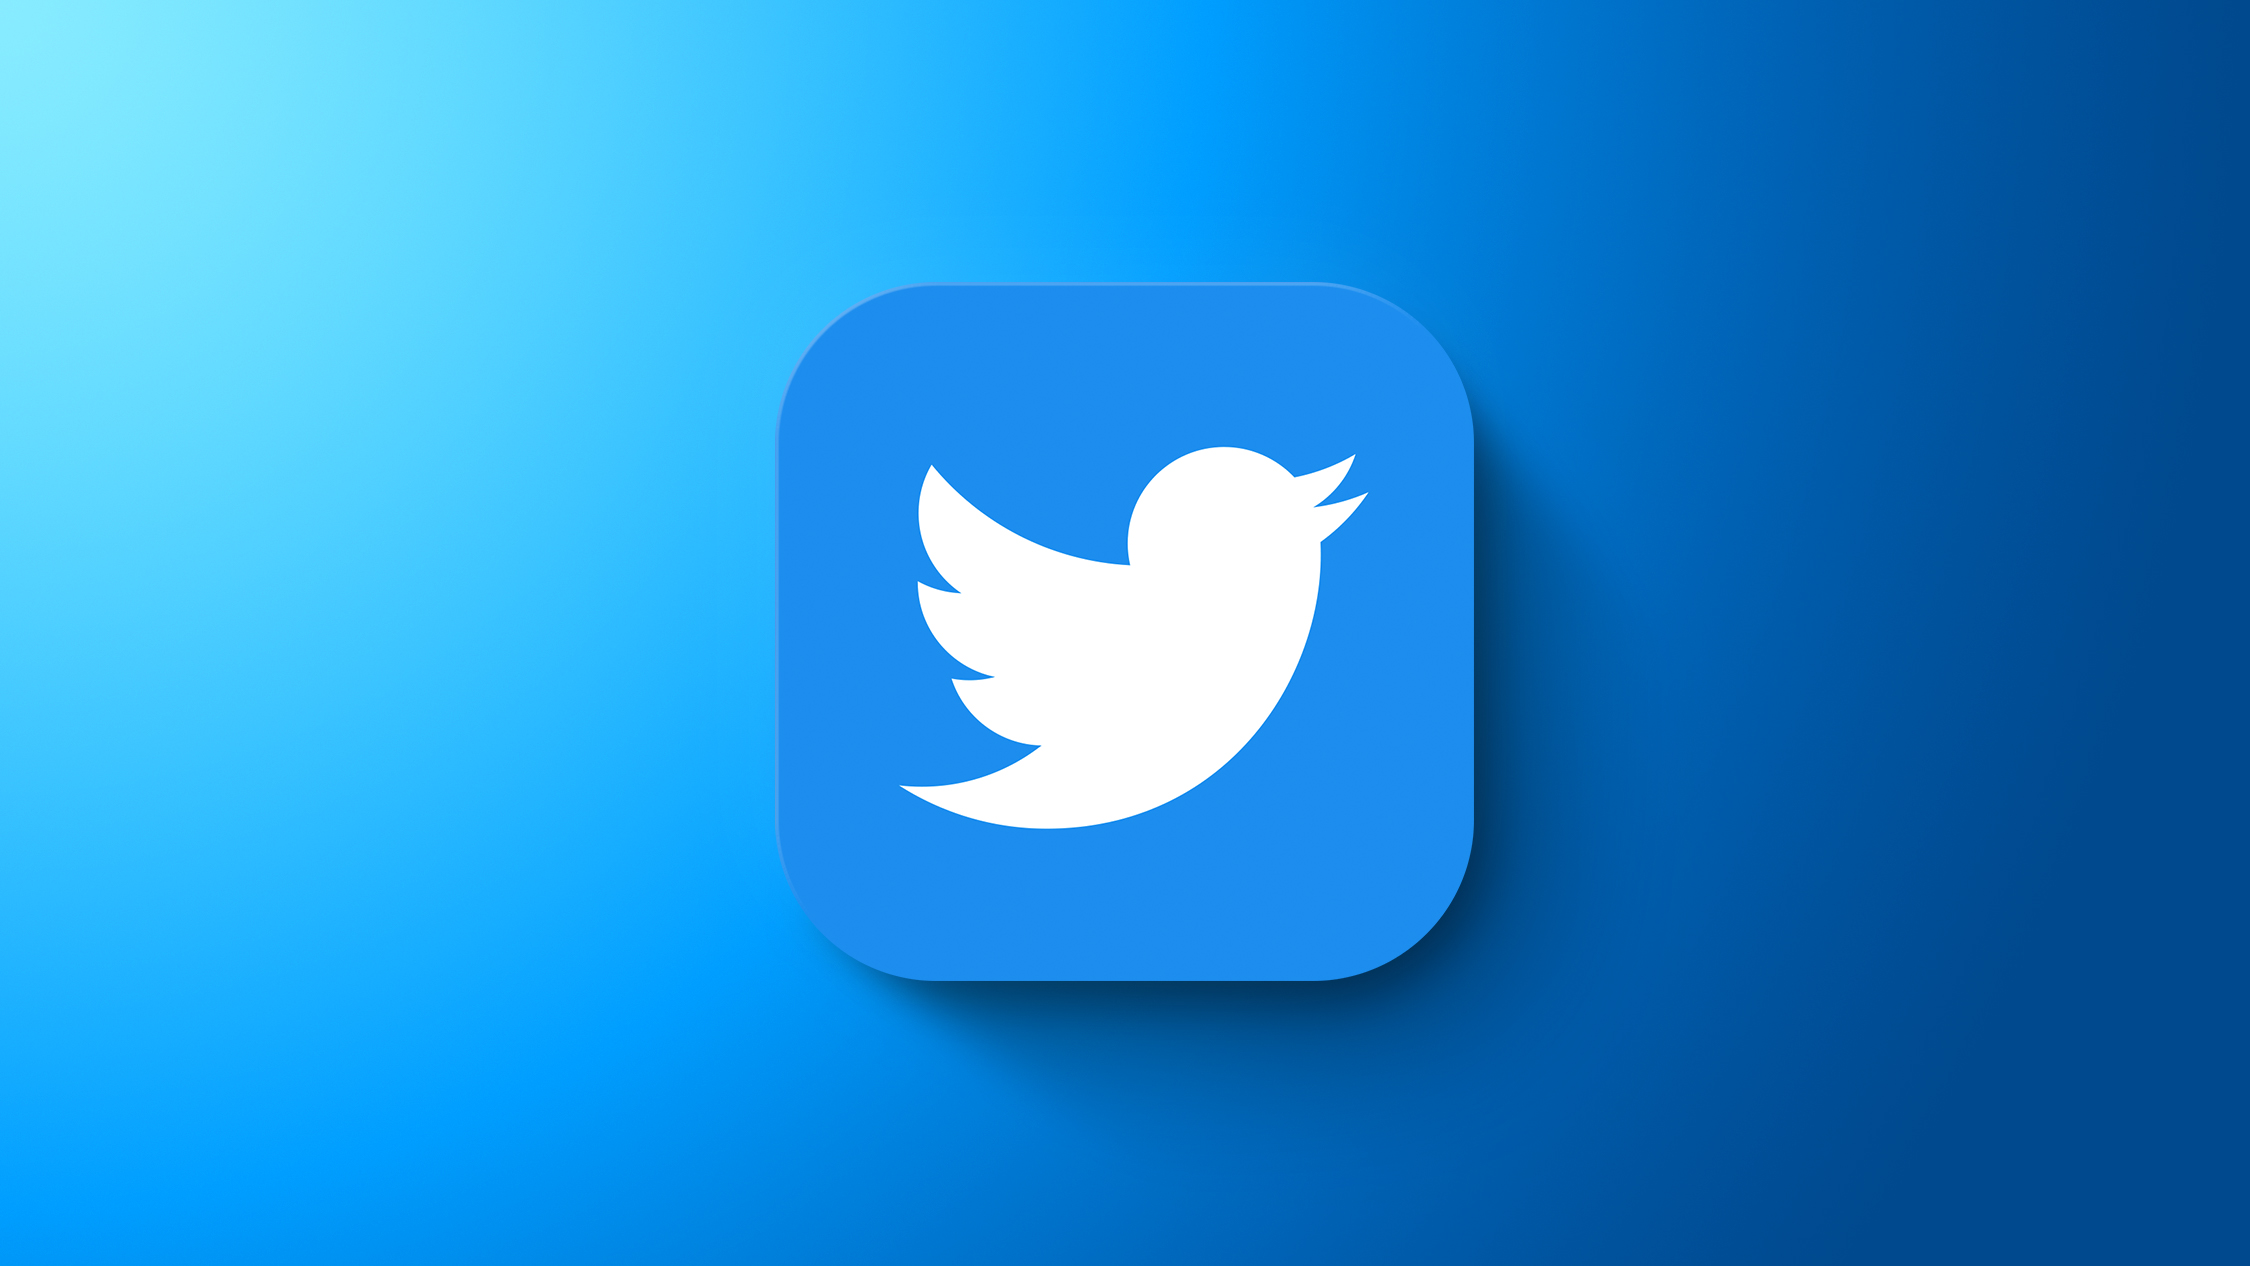 Twitter Blue Price to Increase to $8 Per Month, Will Include Verification Checkmark and Other New Features